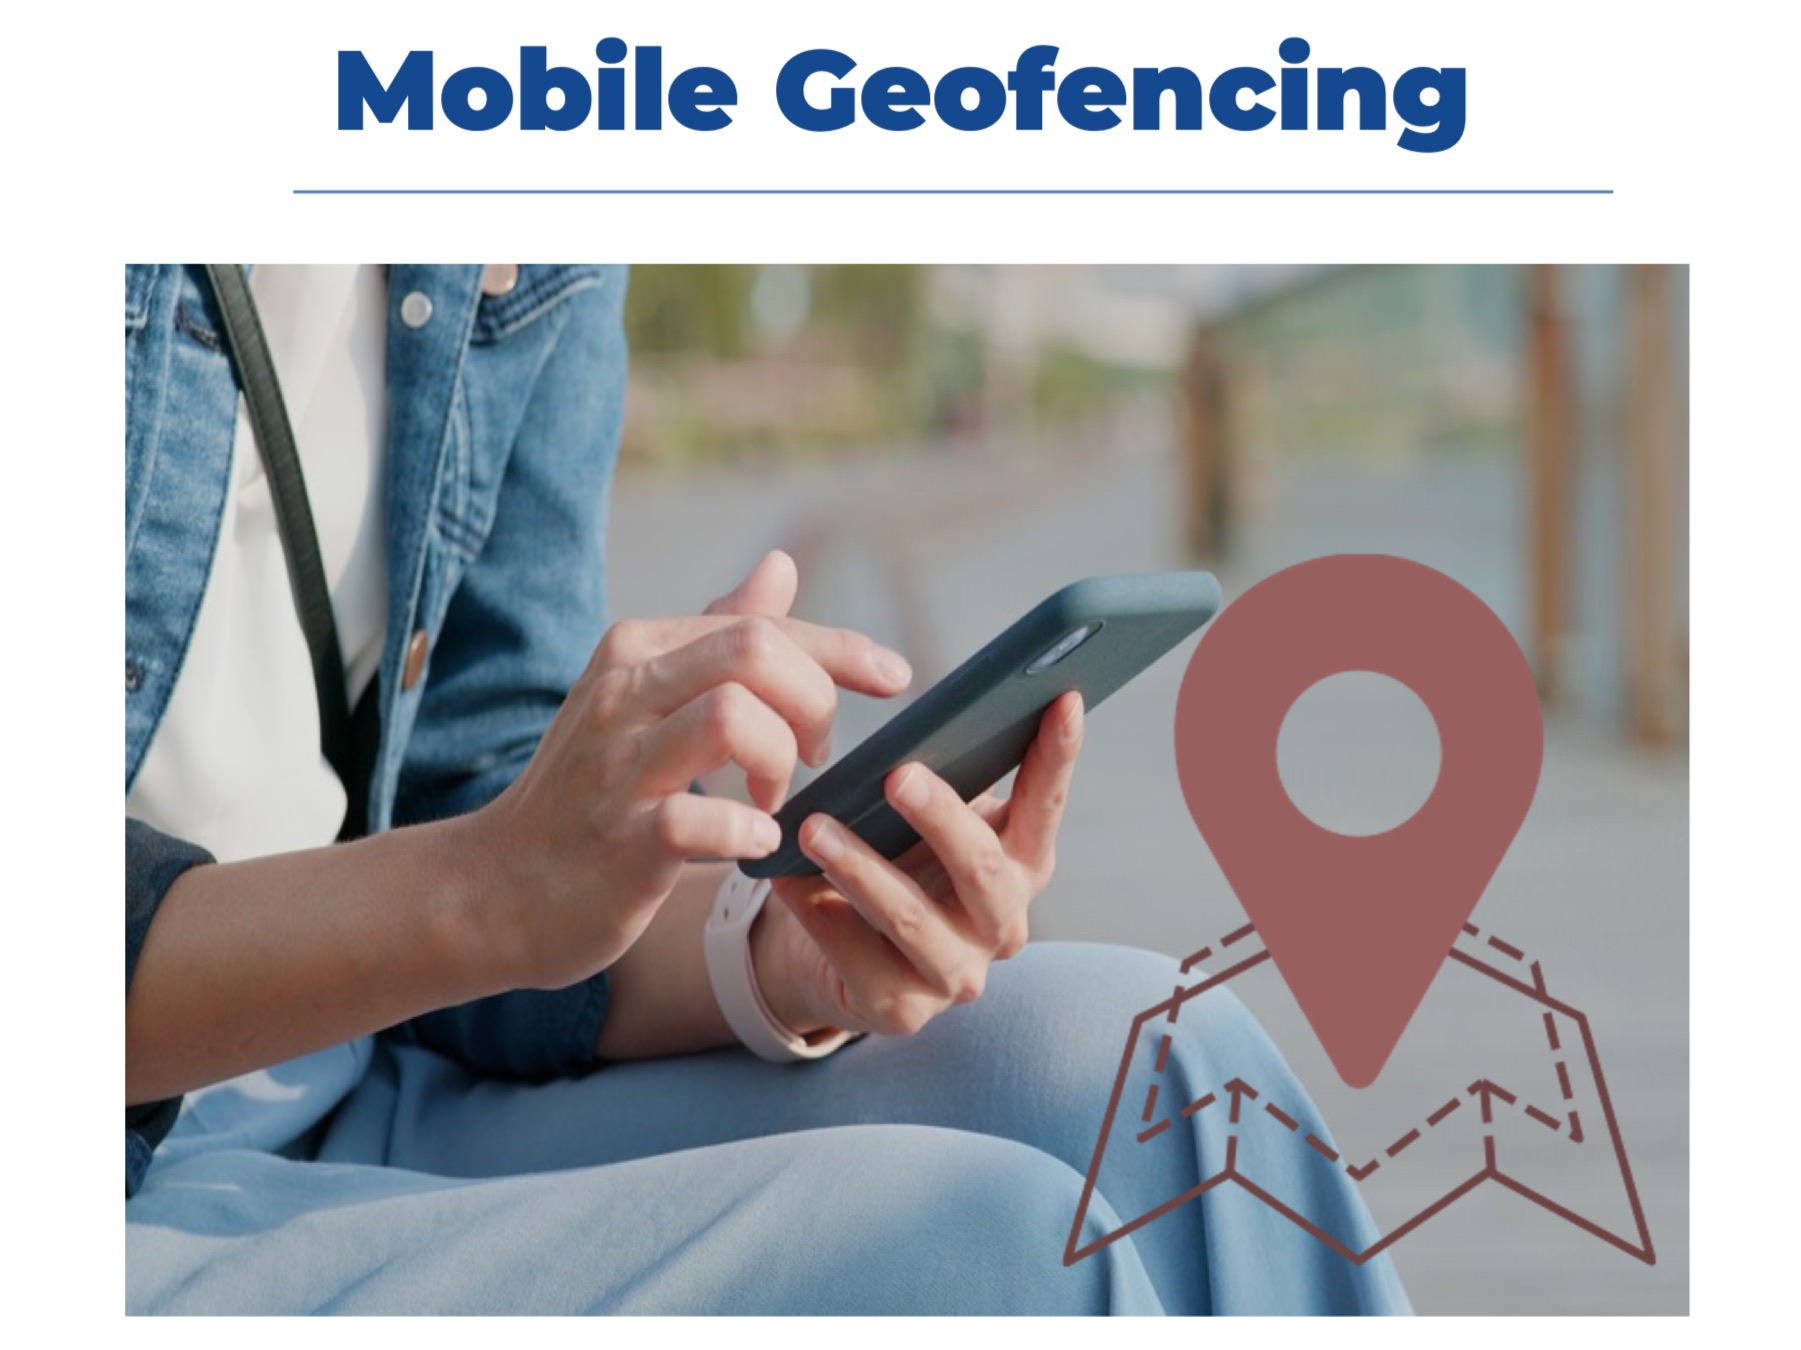 Mobile Geofencing